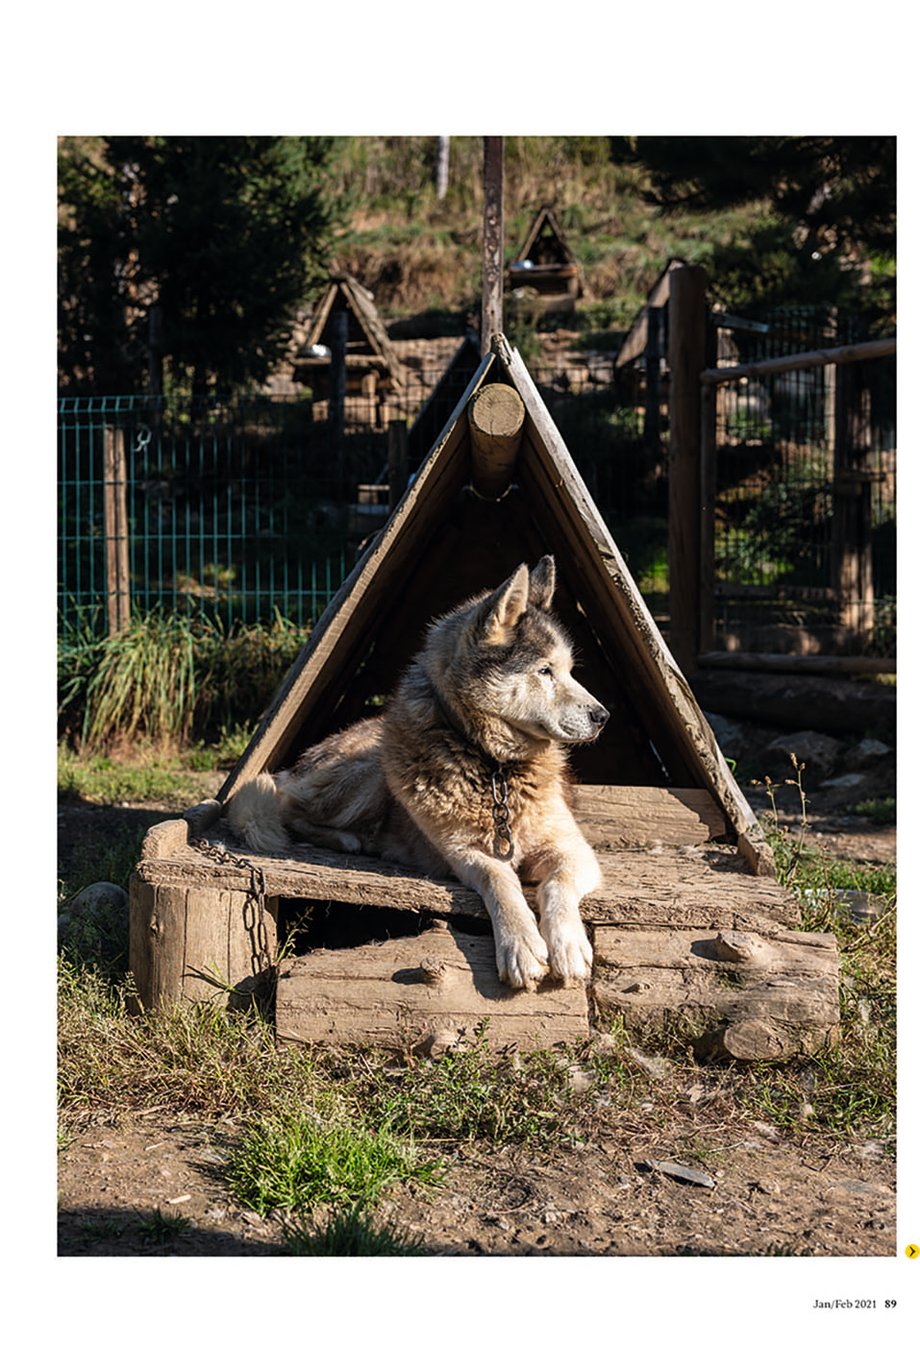 Tearsheet of Husky dog from National Geographic Traveller in the French Pyrenees featuring images shot by Markel Redondo